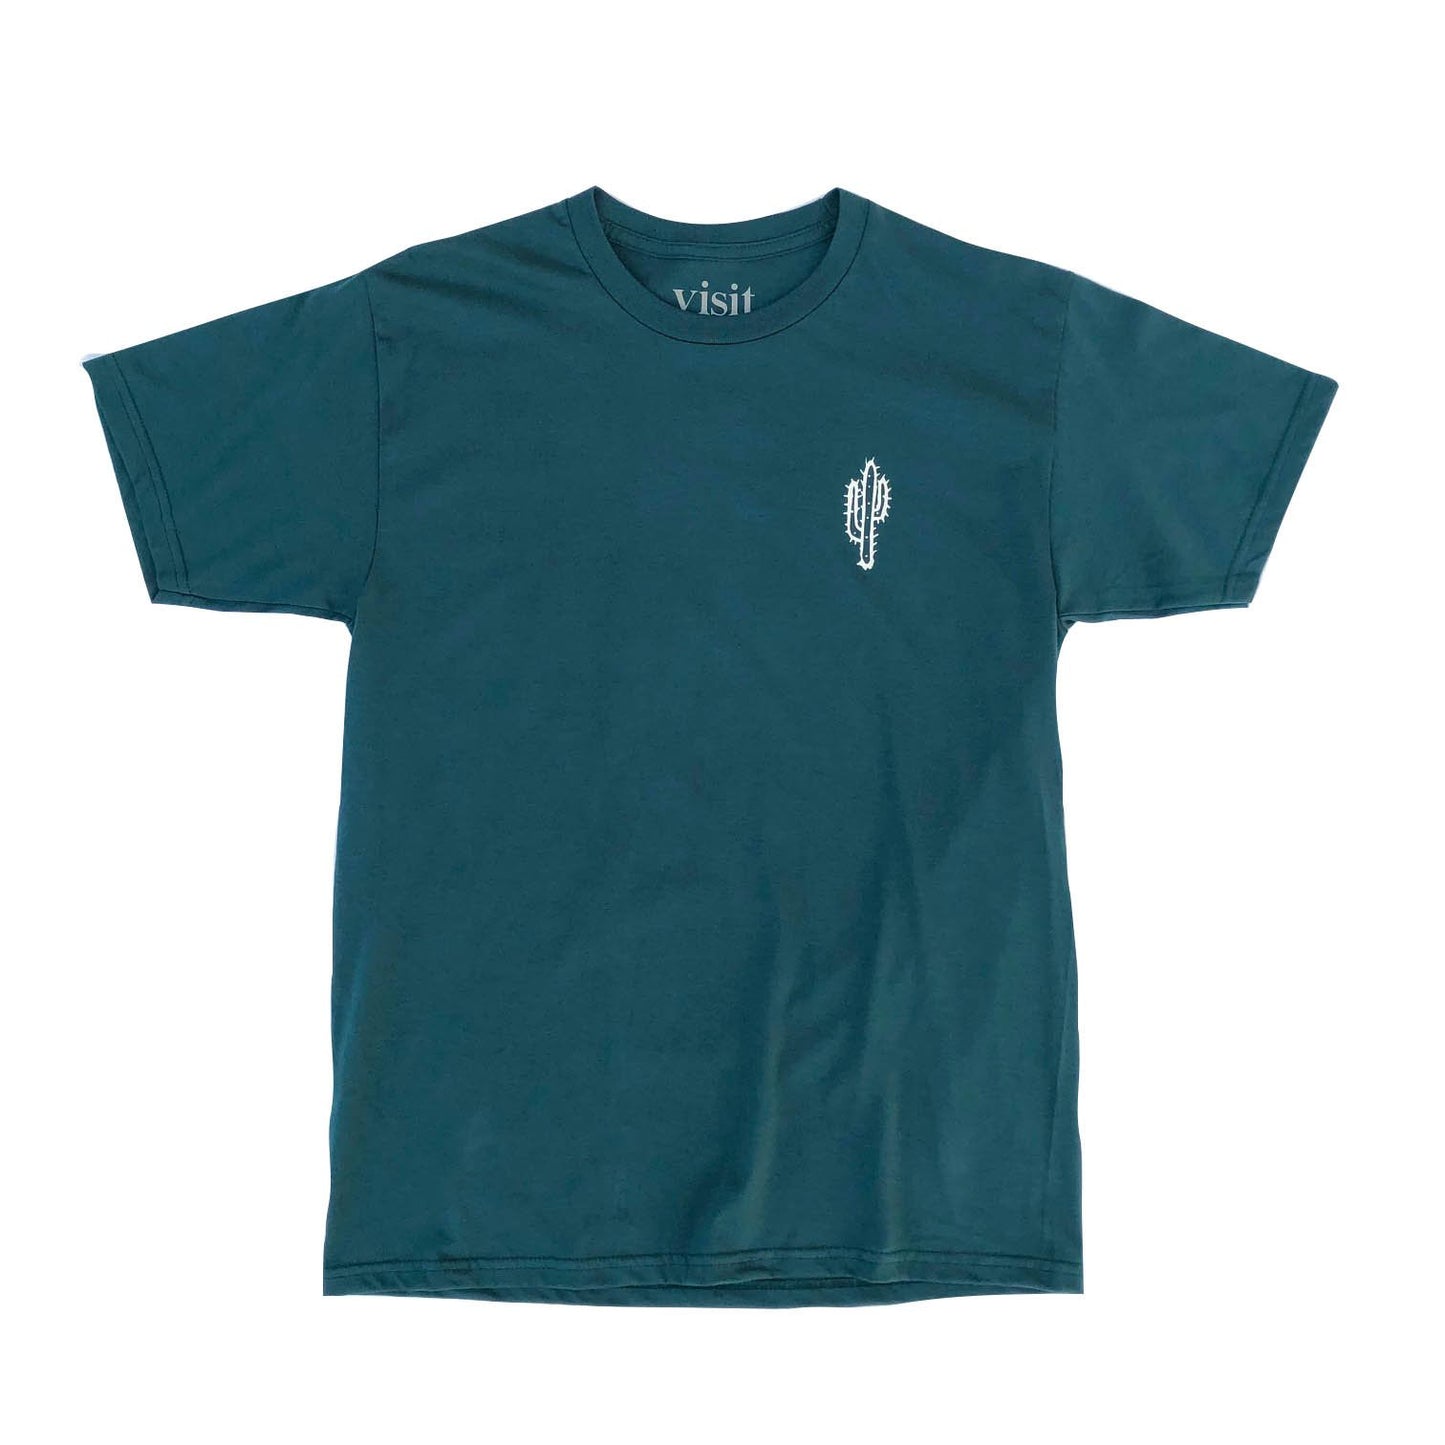 Motel Visit S/S Tee Shirt Pine (size options listed)